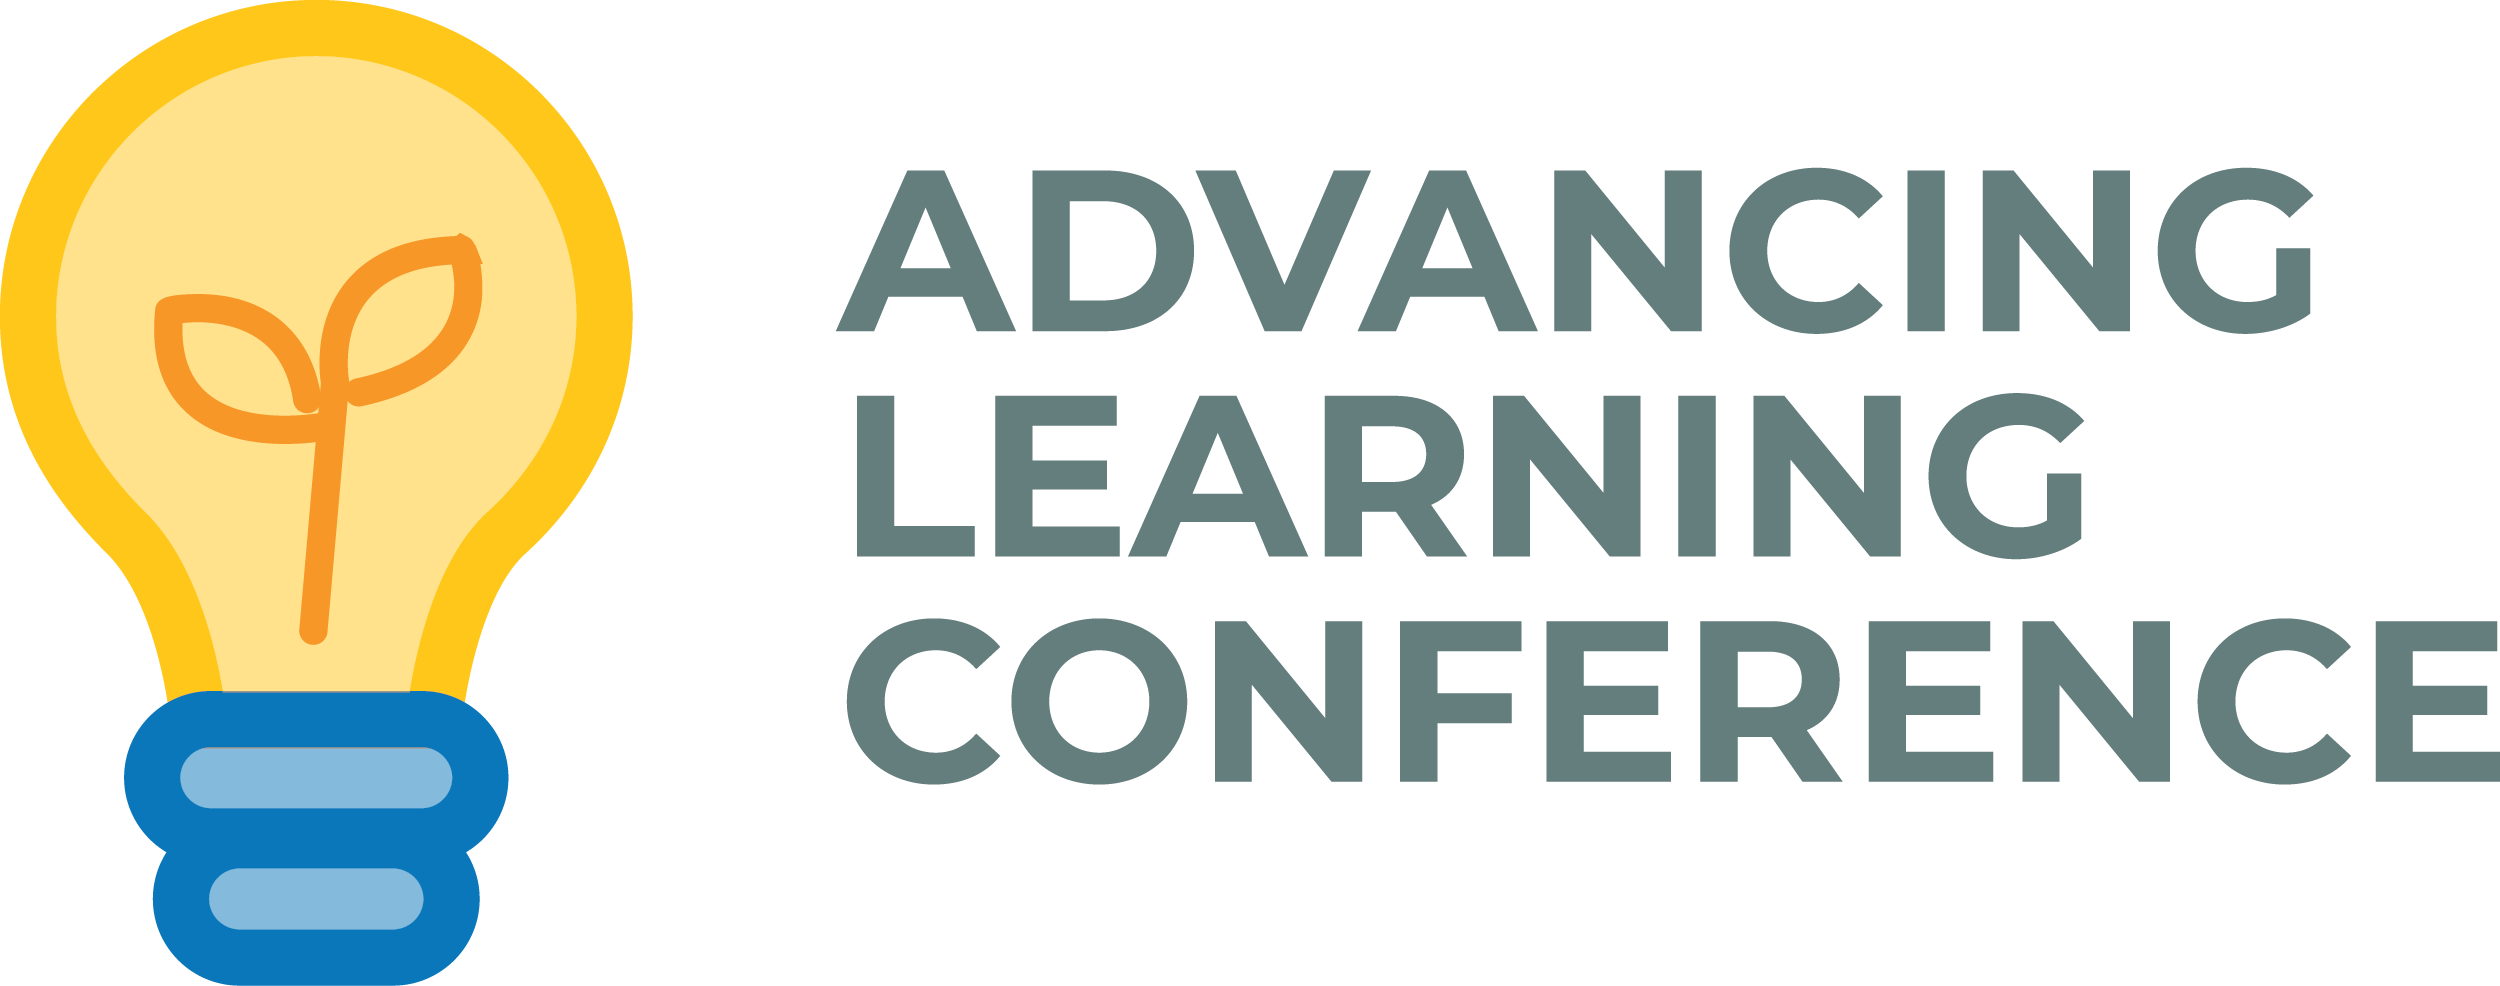 Advancing Learning Conference